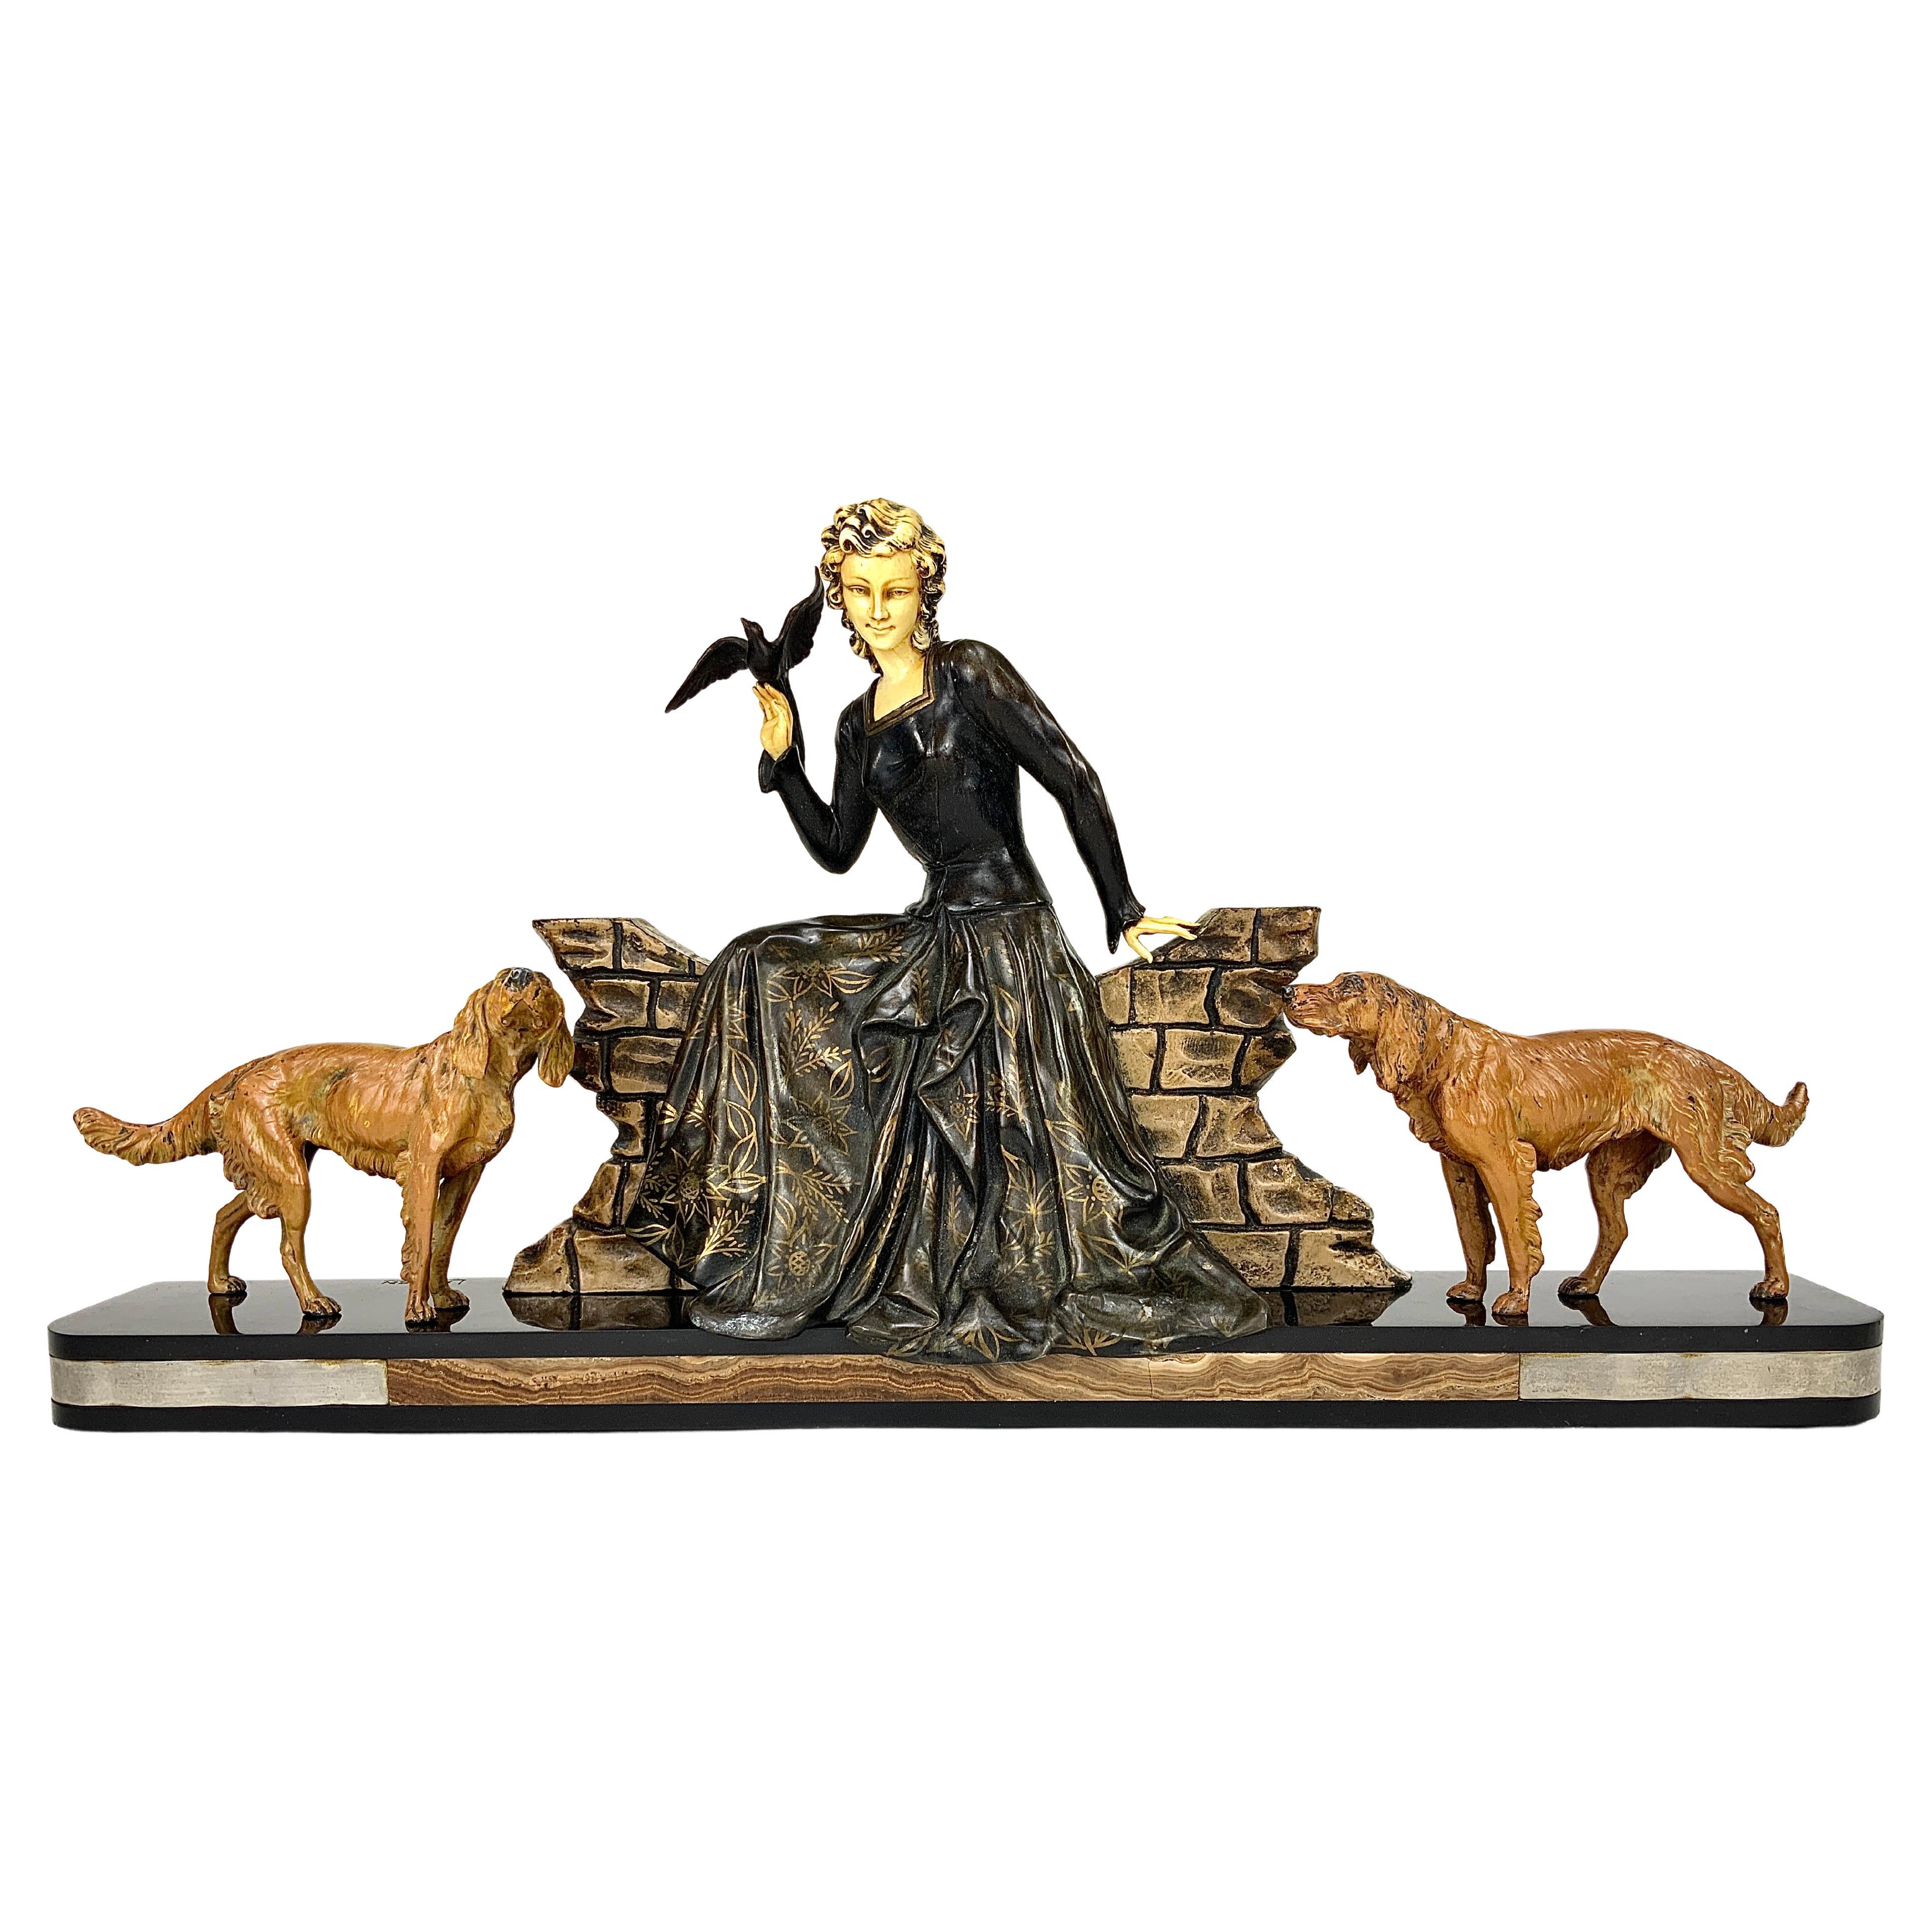 Limousin Art Deco Sculpture "Woman and Her Two Dogs", circa 1930s